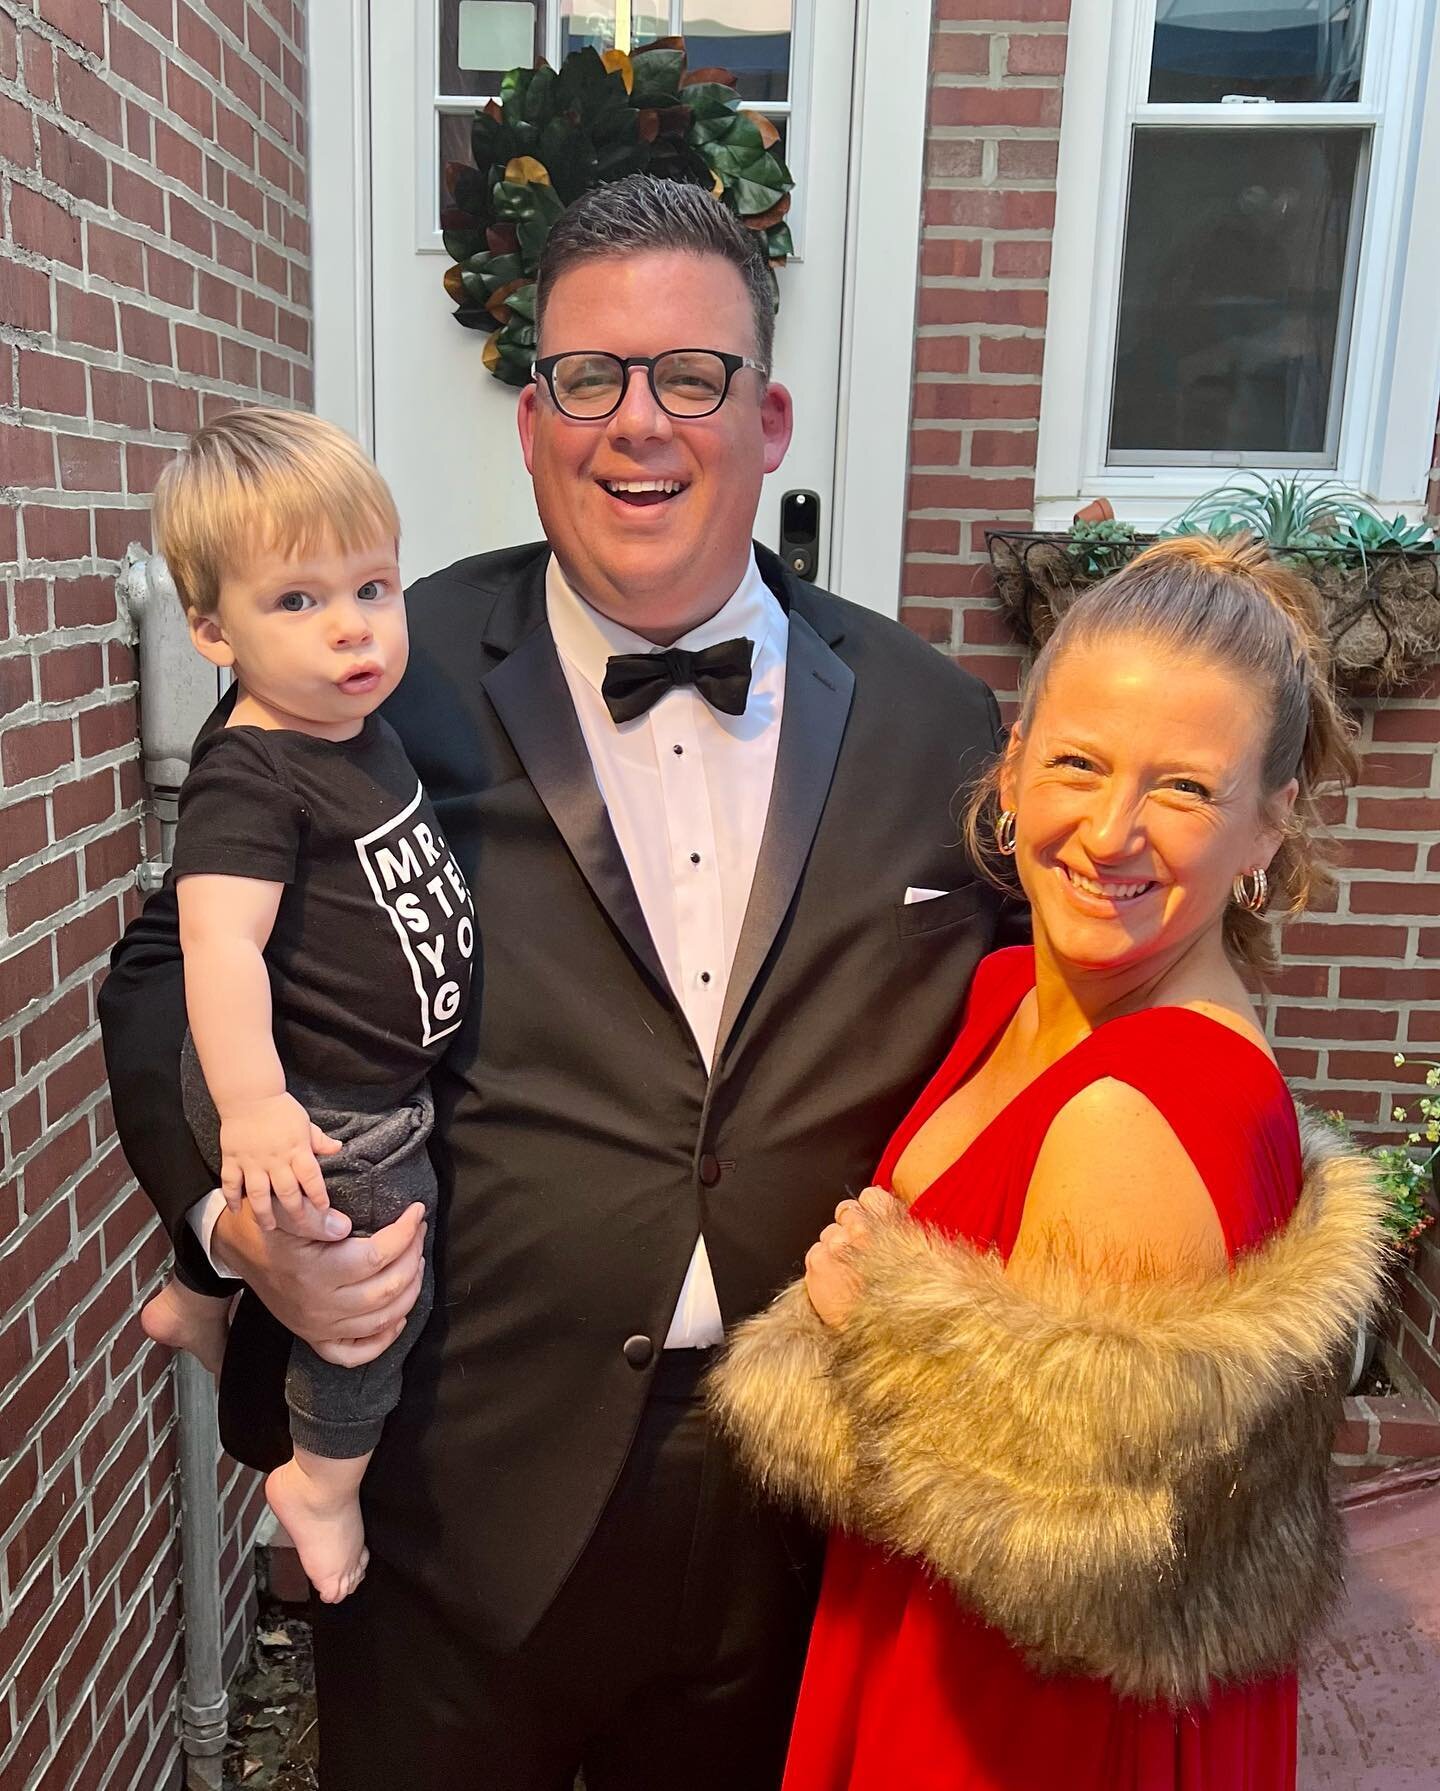 We had such a great time getting dolled up &amp; dapper for the @quakercity_stringband 100th Anniversary Gala. @bobkellyfox29 was an excellent MC (as usual), and the @cityrhythm_bvtlive was a 10/10. The committee folks did a tremendous job putting th